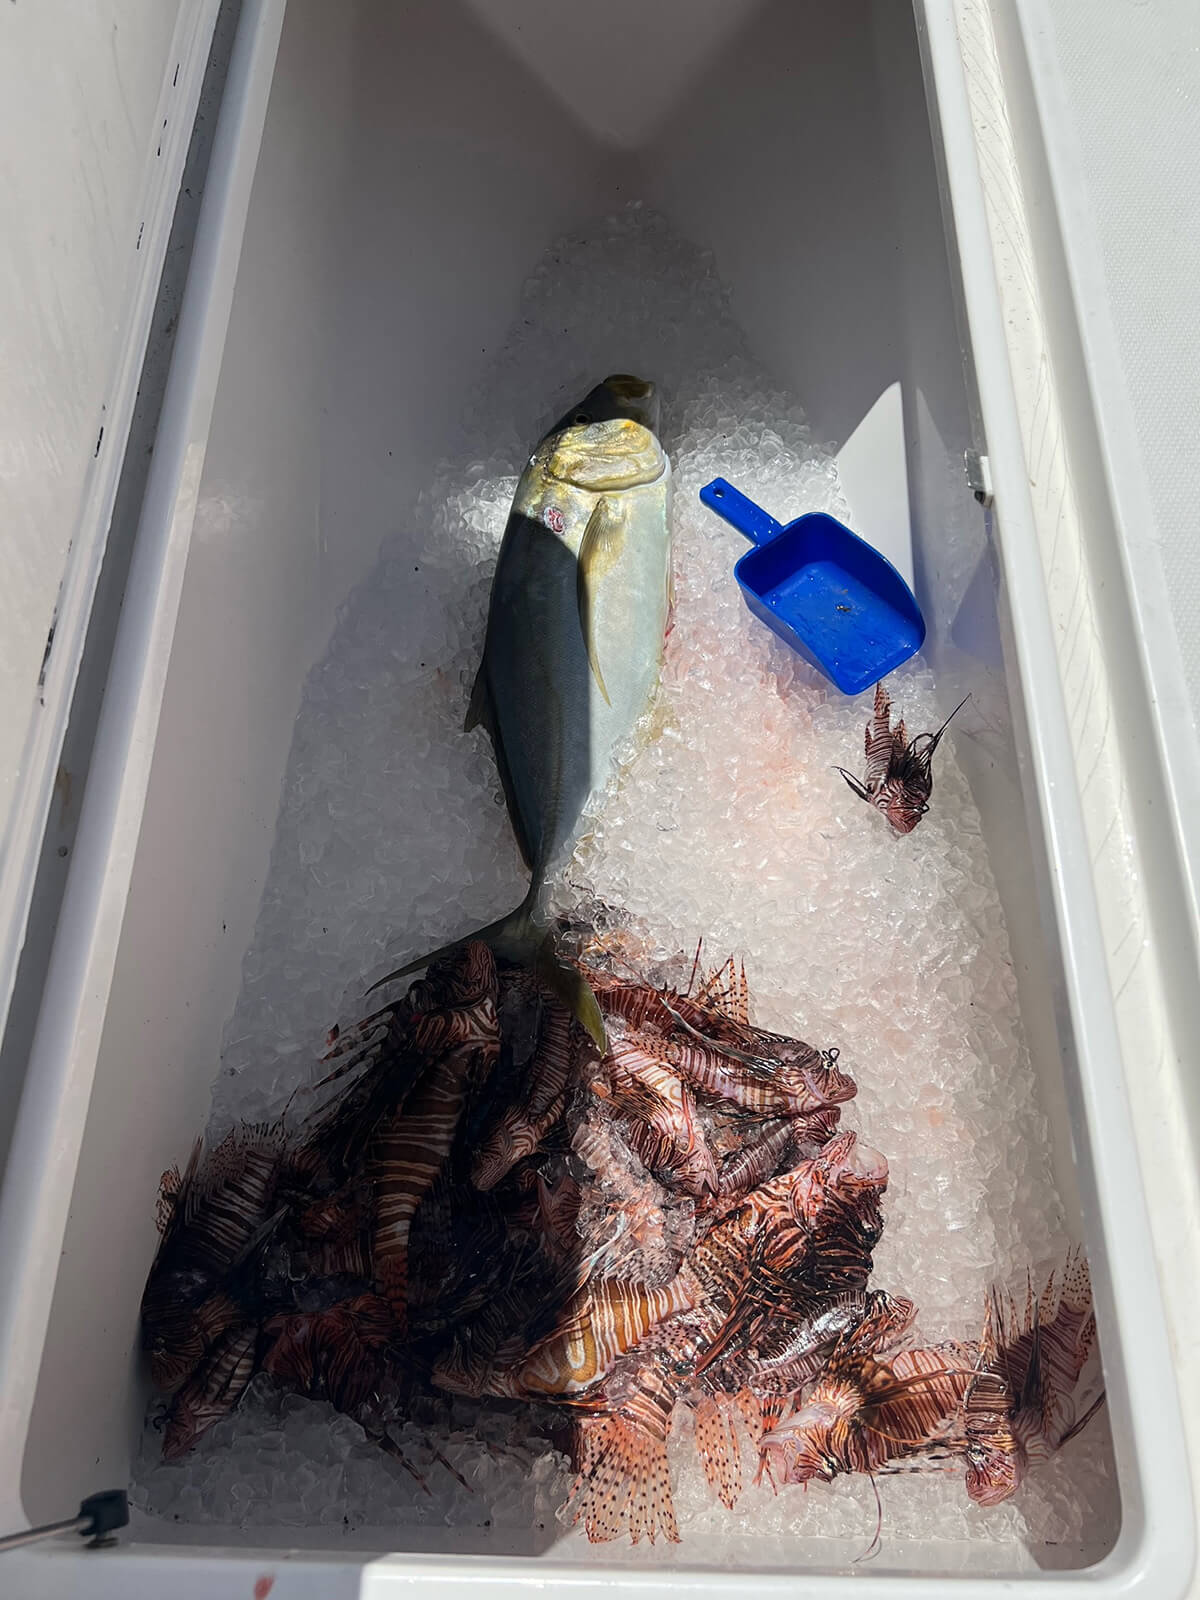 Cooler of lionfish